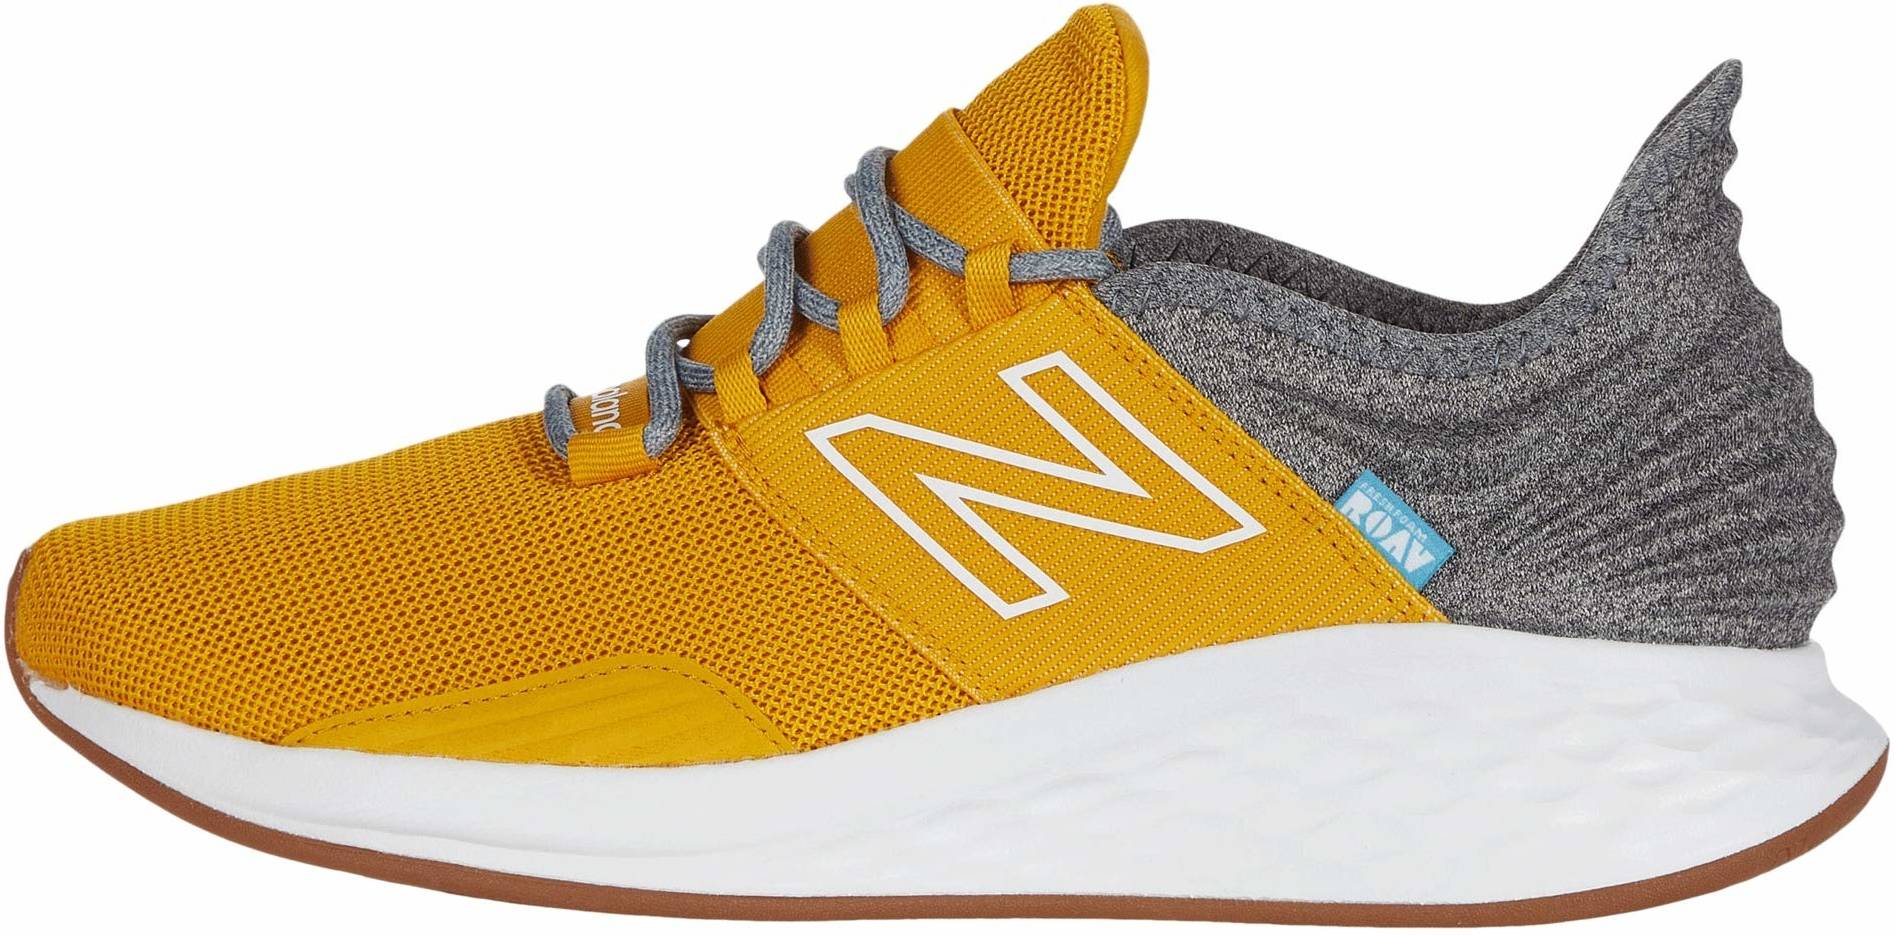 Save 33% on Yellow Running Shoes (71 